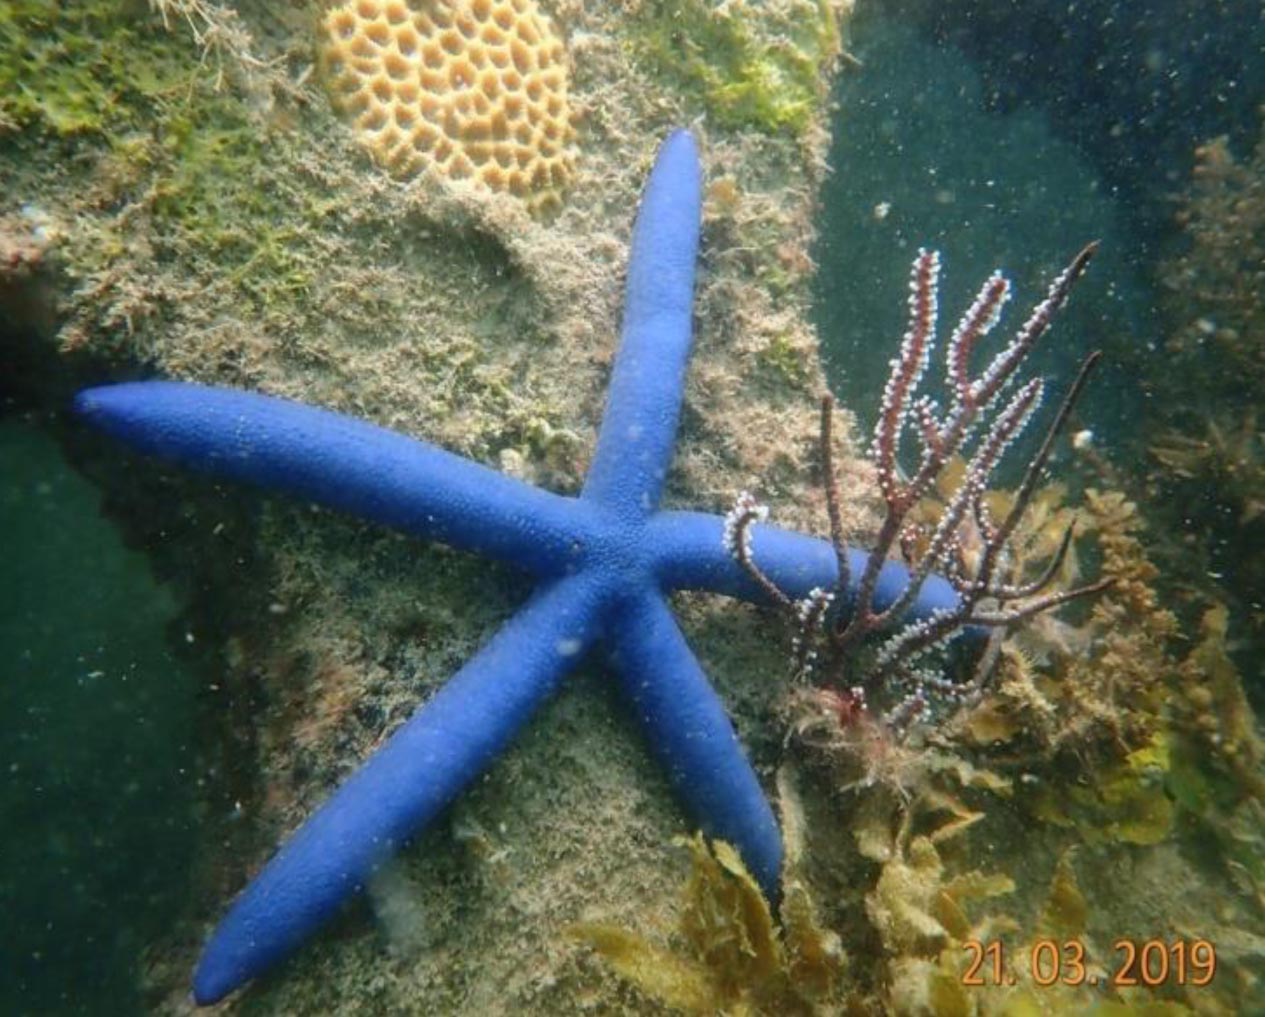 Marine life has started to return around artificial reefs